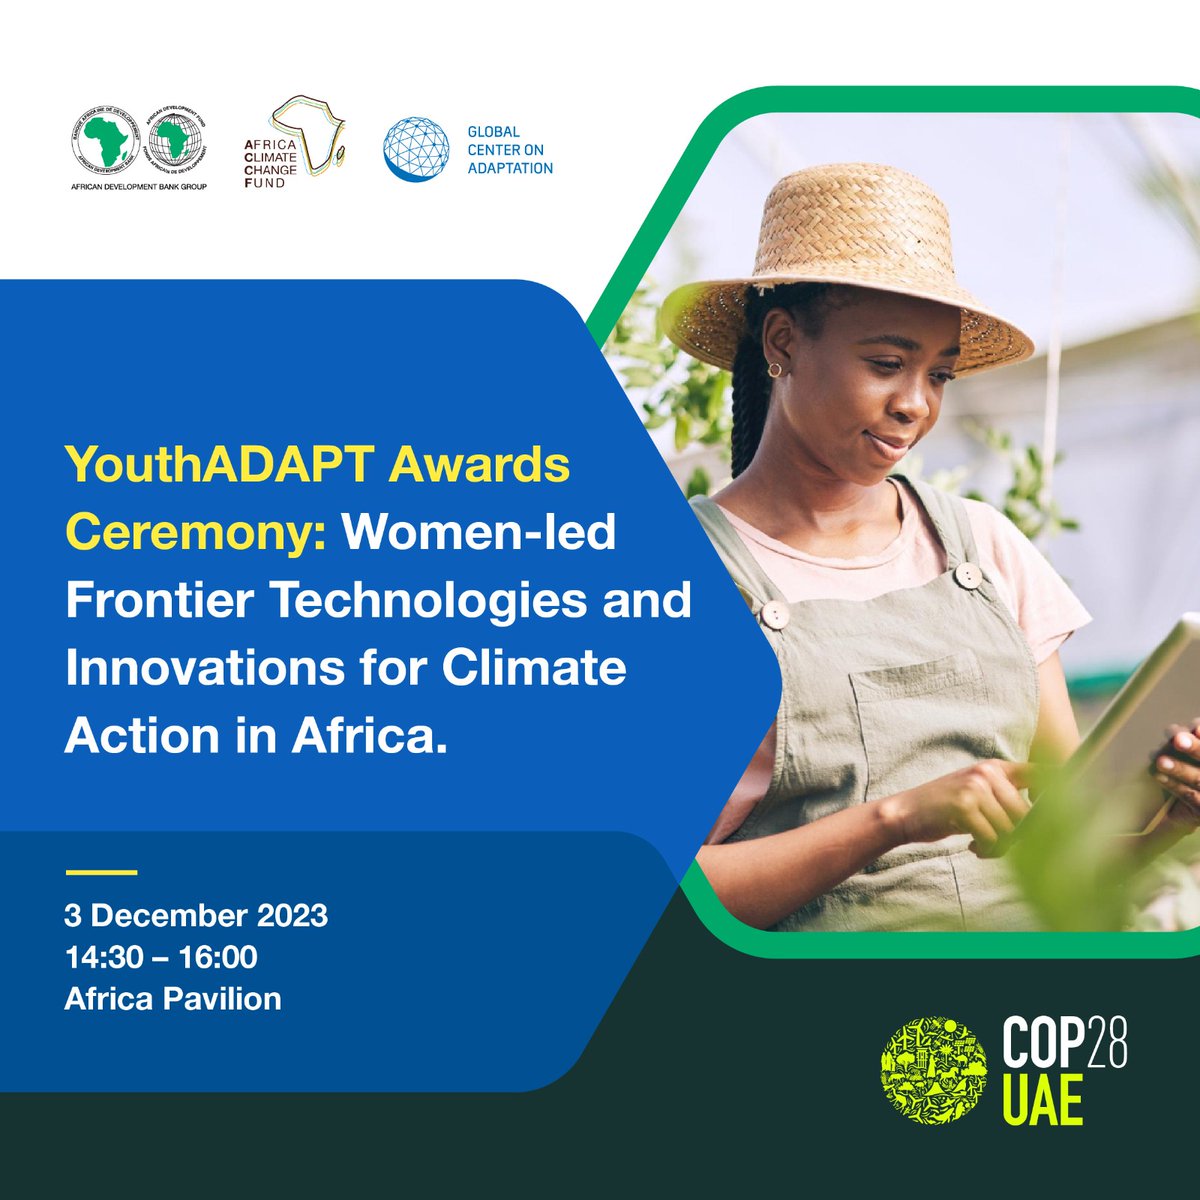 Happening NOW! 📢📢

Join us as we Unveil the 2023 #YouthADAPTChallenge Winners at COP28

3 December 2023, 14:30-16:00 Dubai Time (GMT+4)
English: vimeo.com/event/3906323 
French: vimeo.com/event/3906327

@AfDB_Group @GCAdaptation